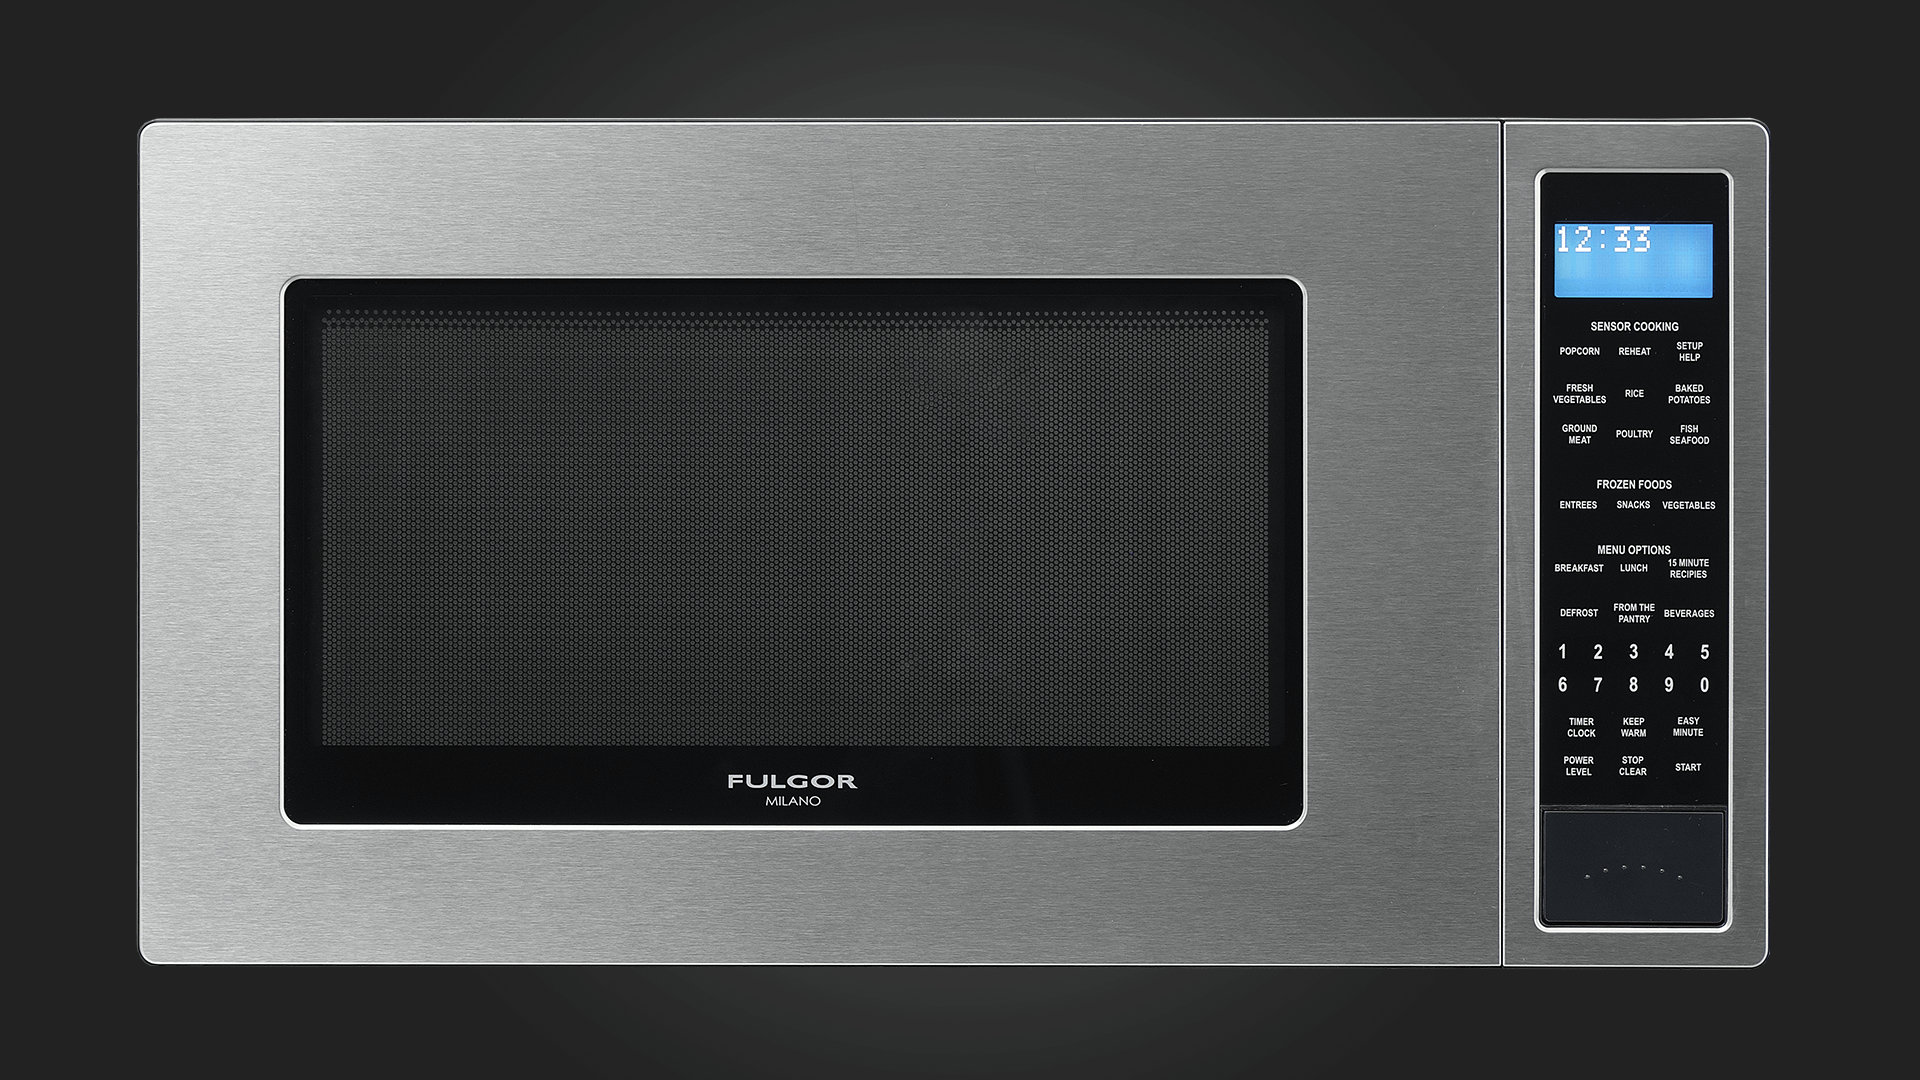 24" MICROWAVE OVEN